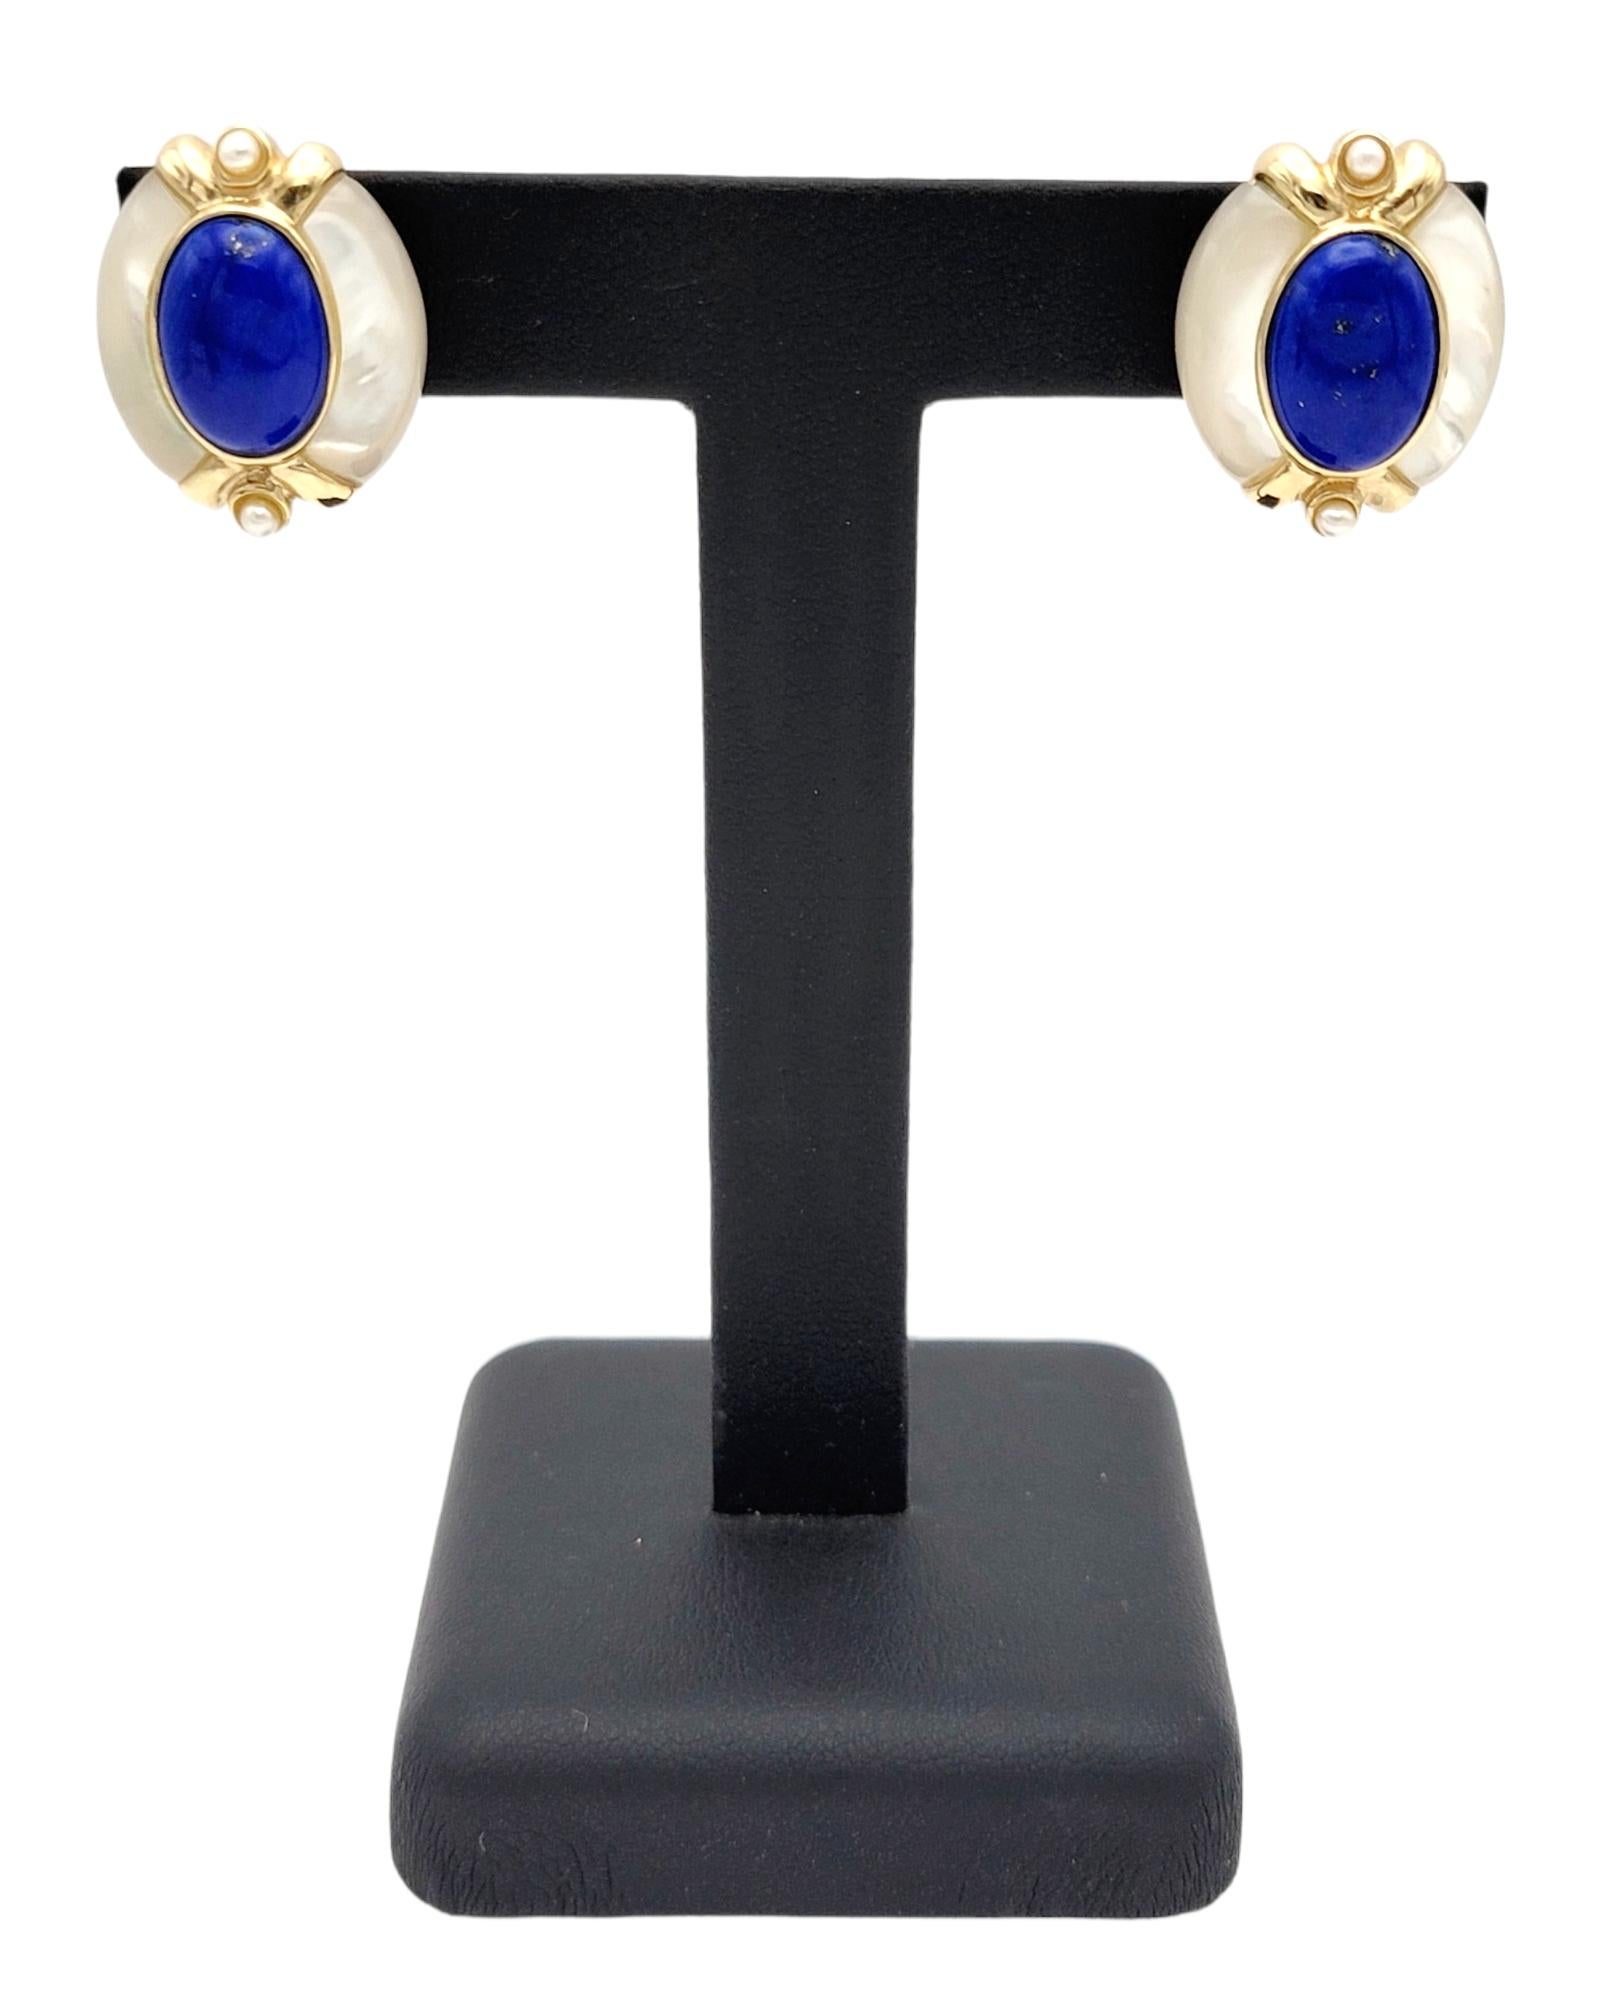 Women's Oval Lapis Lazuli, Mother of Pearl and Seed Pearl Pierced Earrings 14 Karat Gold For Sale